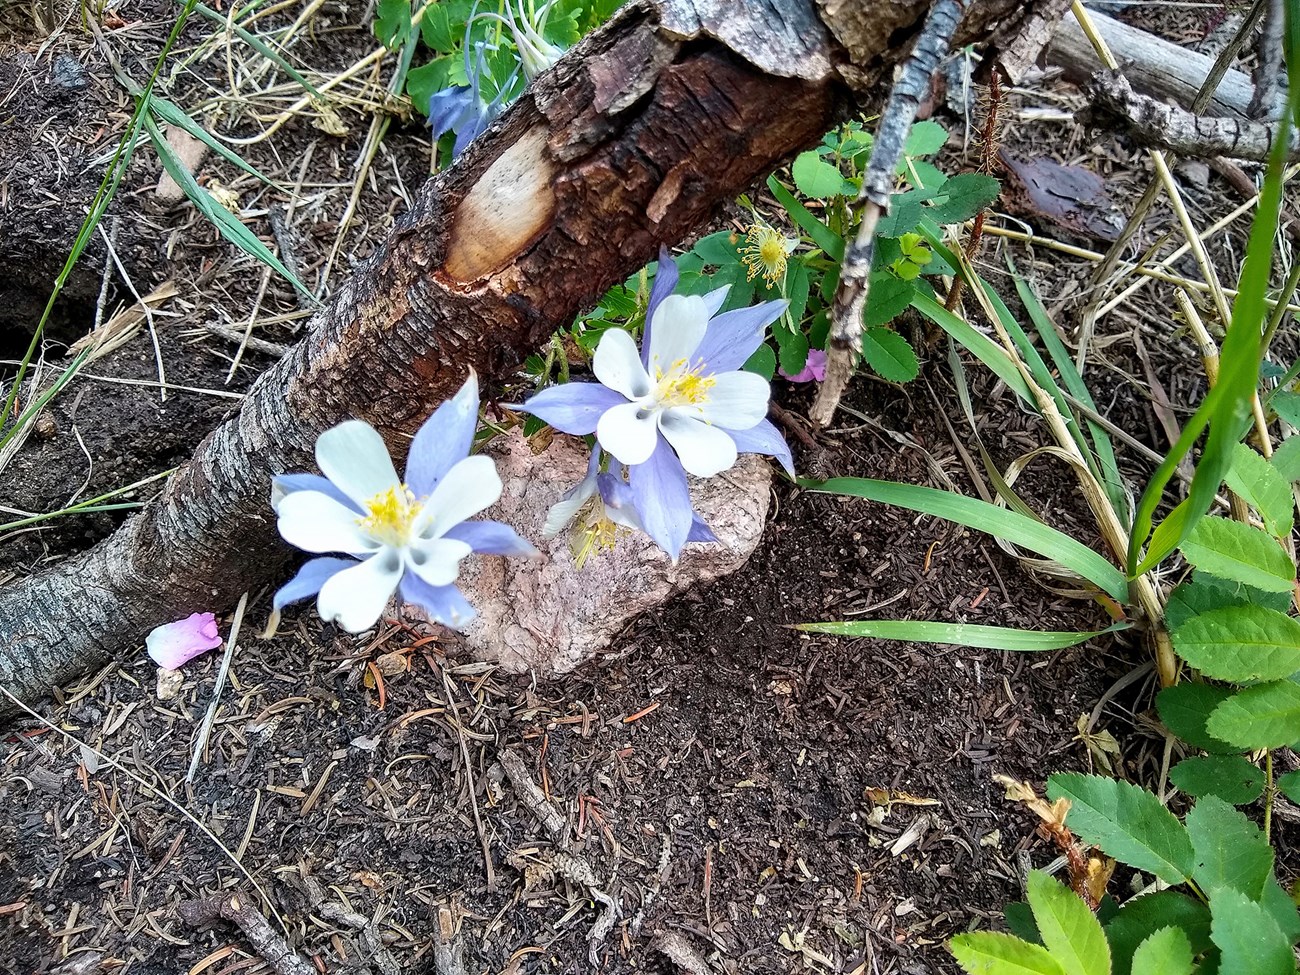 Purple and white flowers grow out of dark brown forest soil surrounded by green vegetation